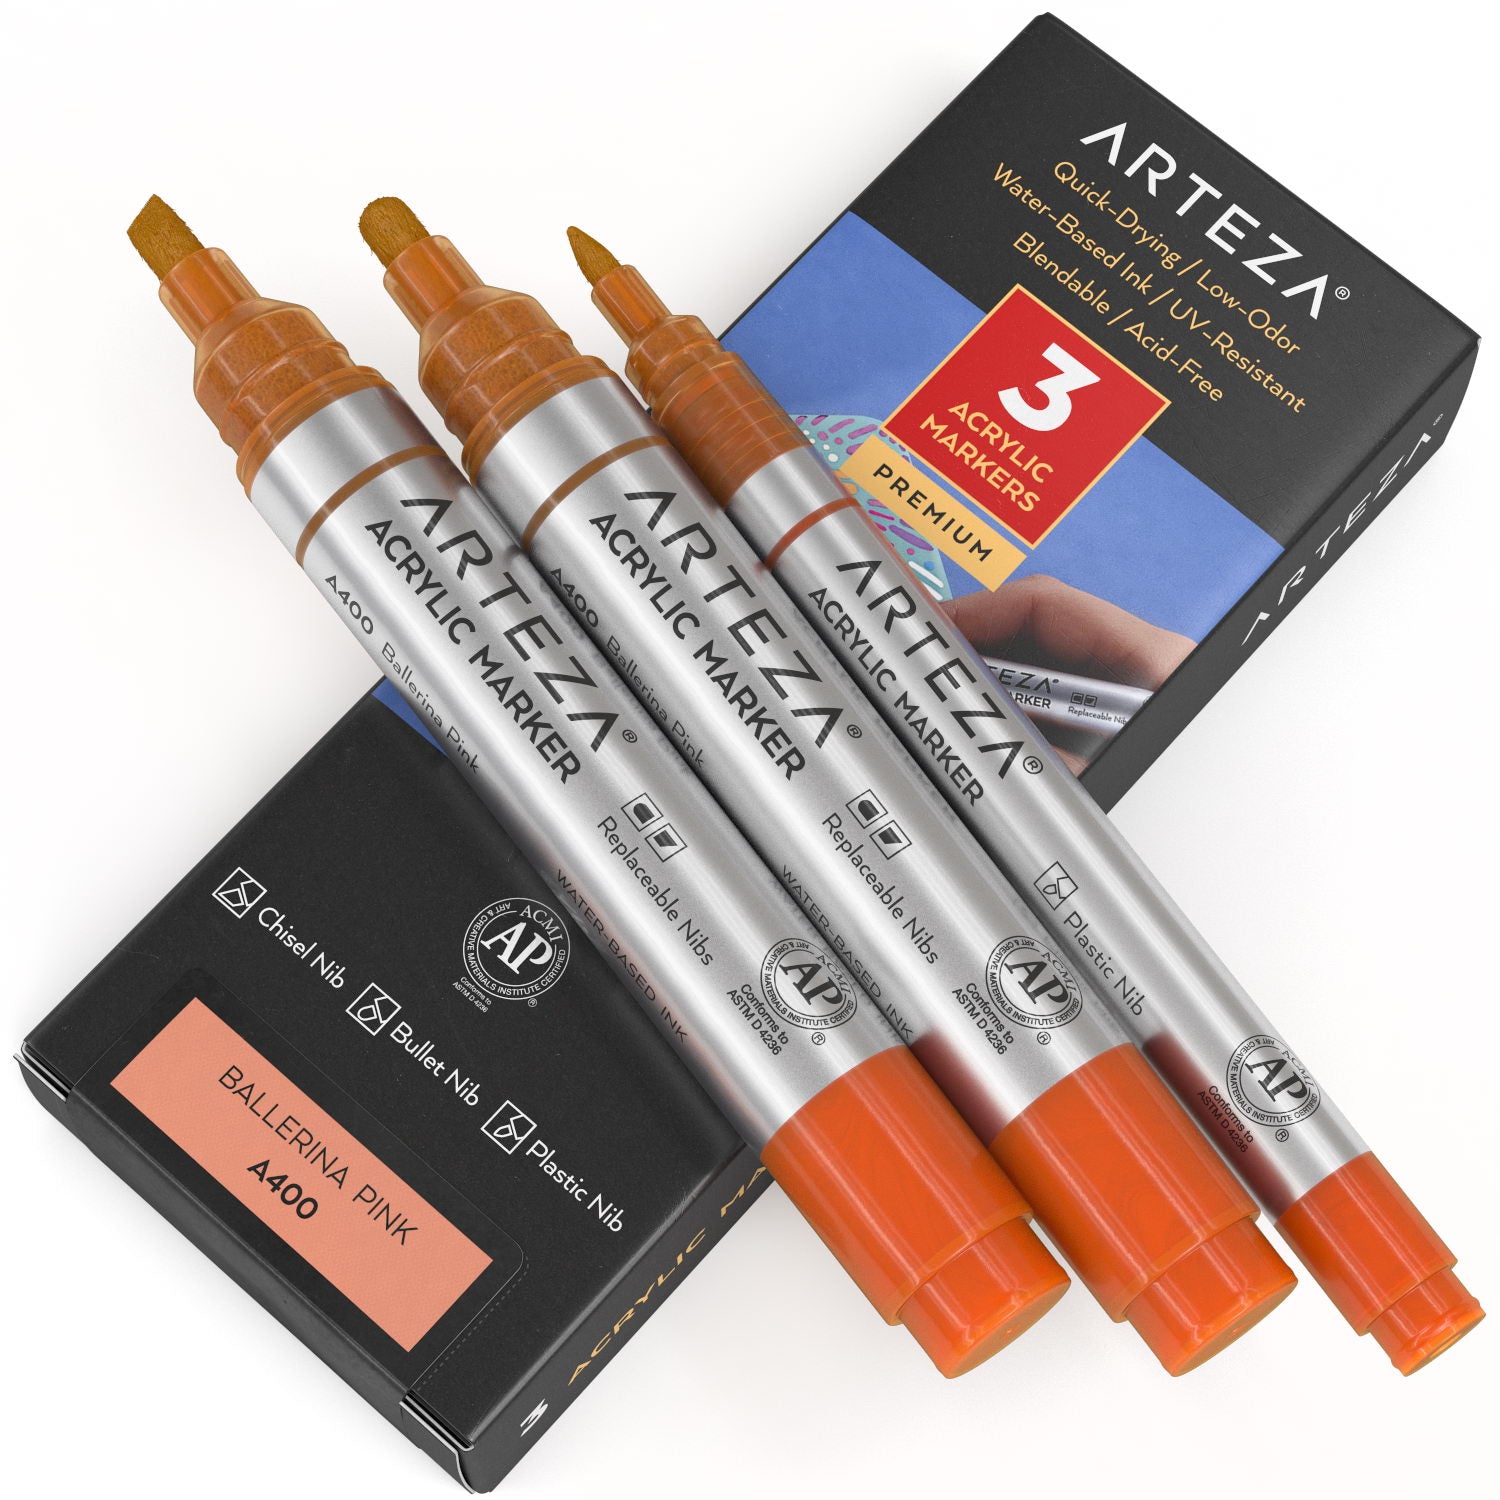 Premium Acrylic Markers 40pk - Paint Pens & Markers - Art Supplies & Painting